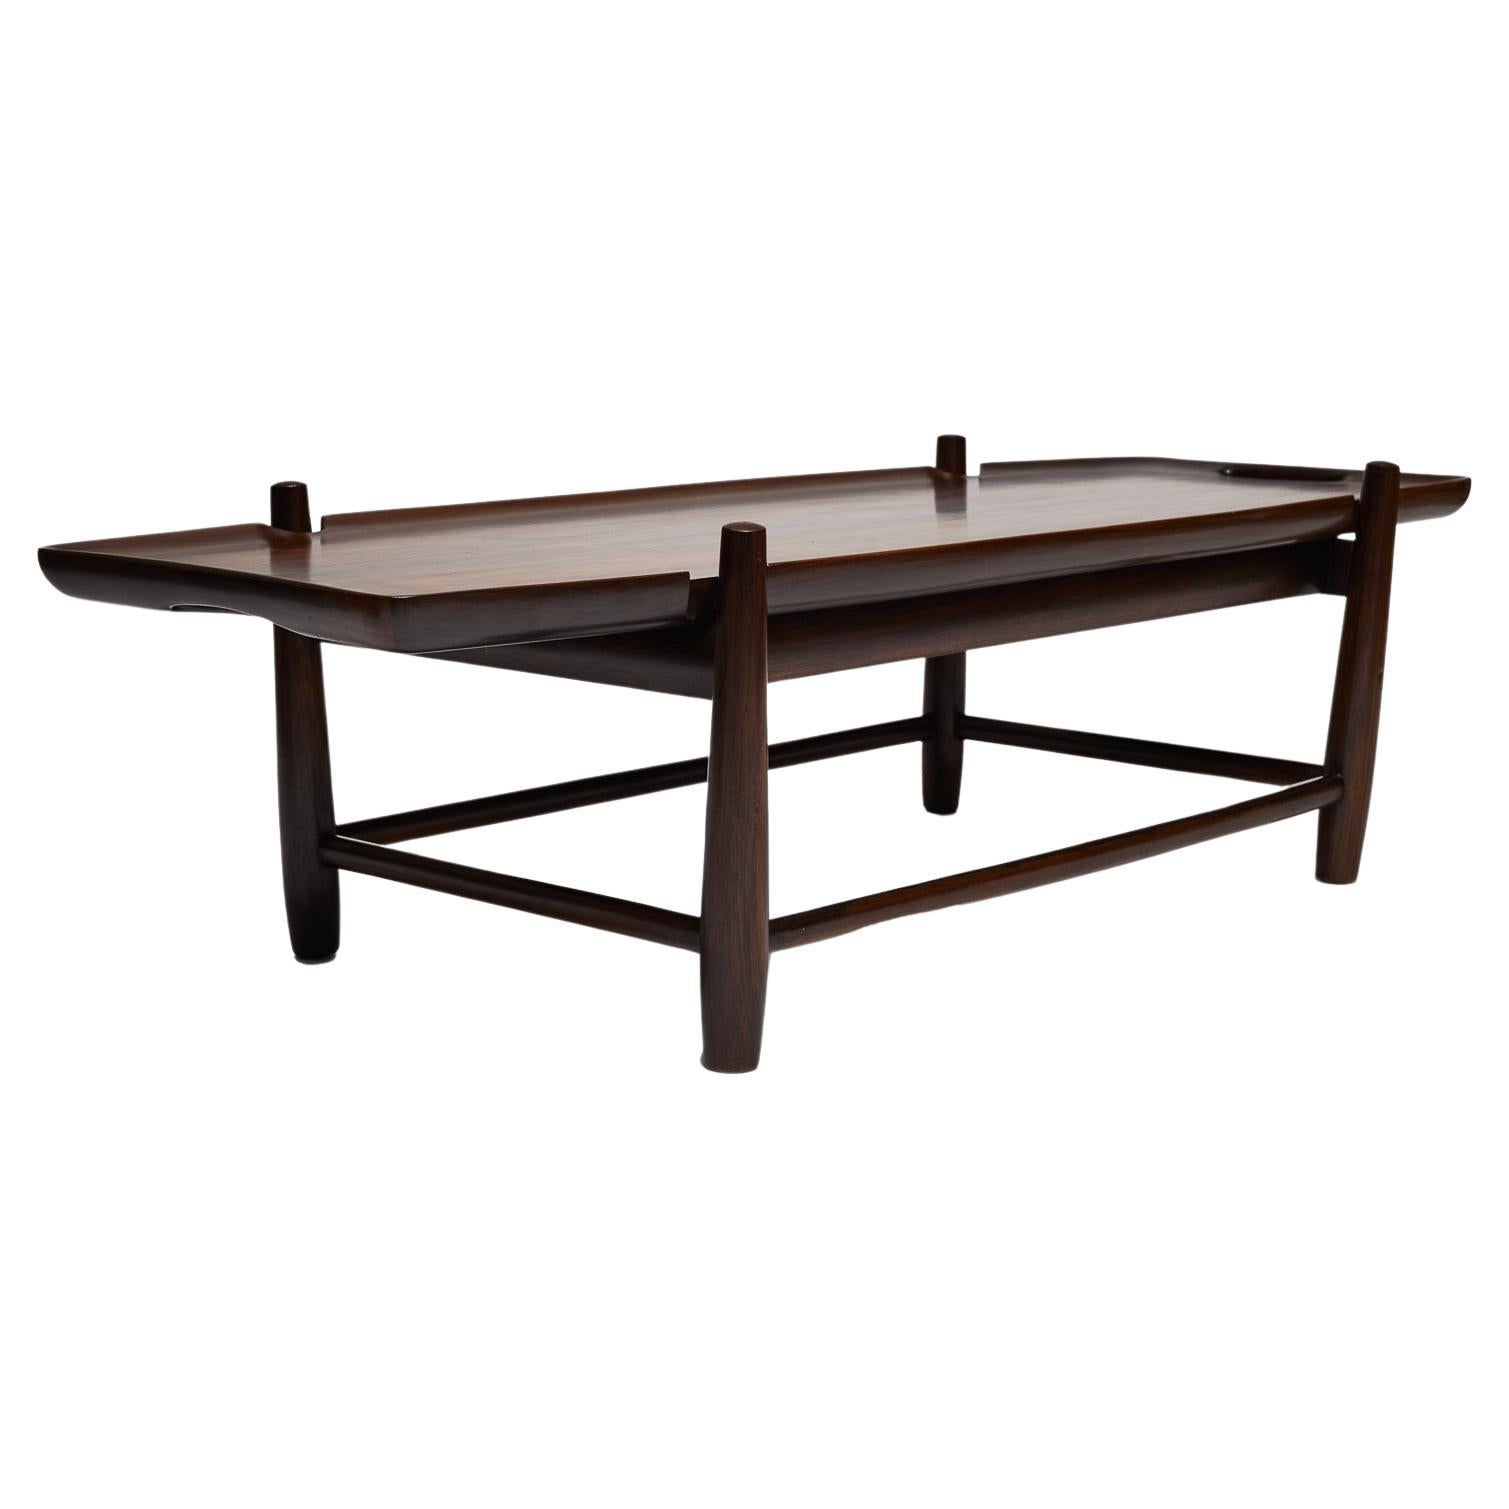 Available today, the “Arimelo” Coffee table has handles in Brazilian rosewood (called Jacaranda) and a solid jacaranda frame. The hardwood has been refinished highlighting the wood veins and age of the piece. This piece has a beautiful design